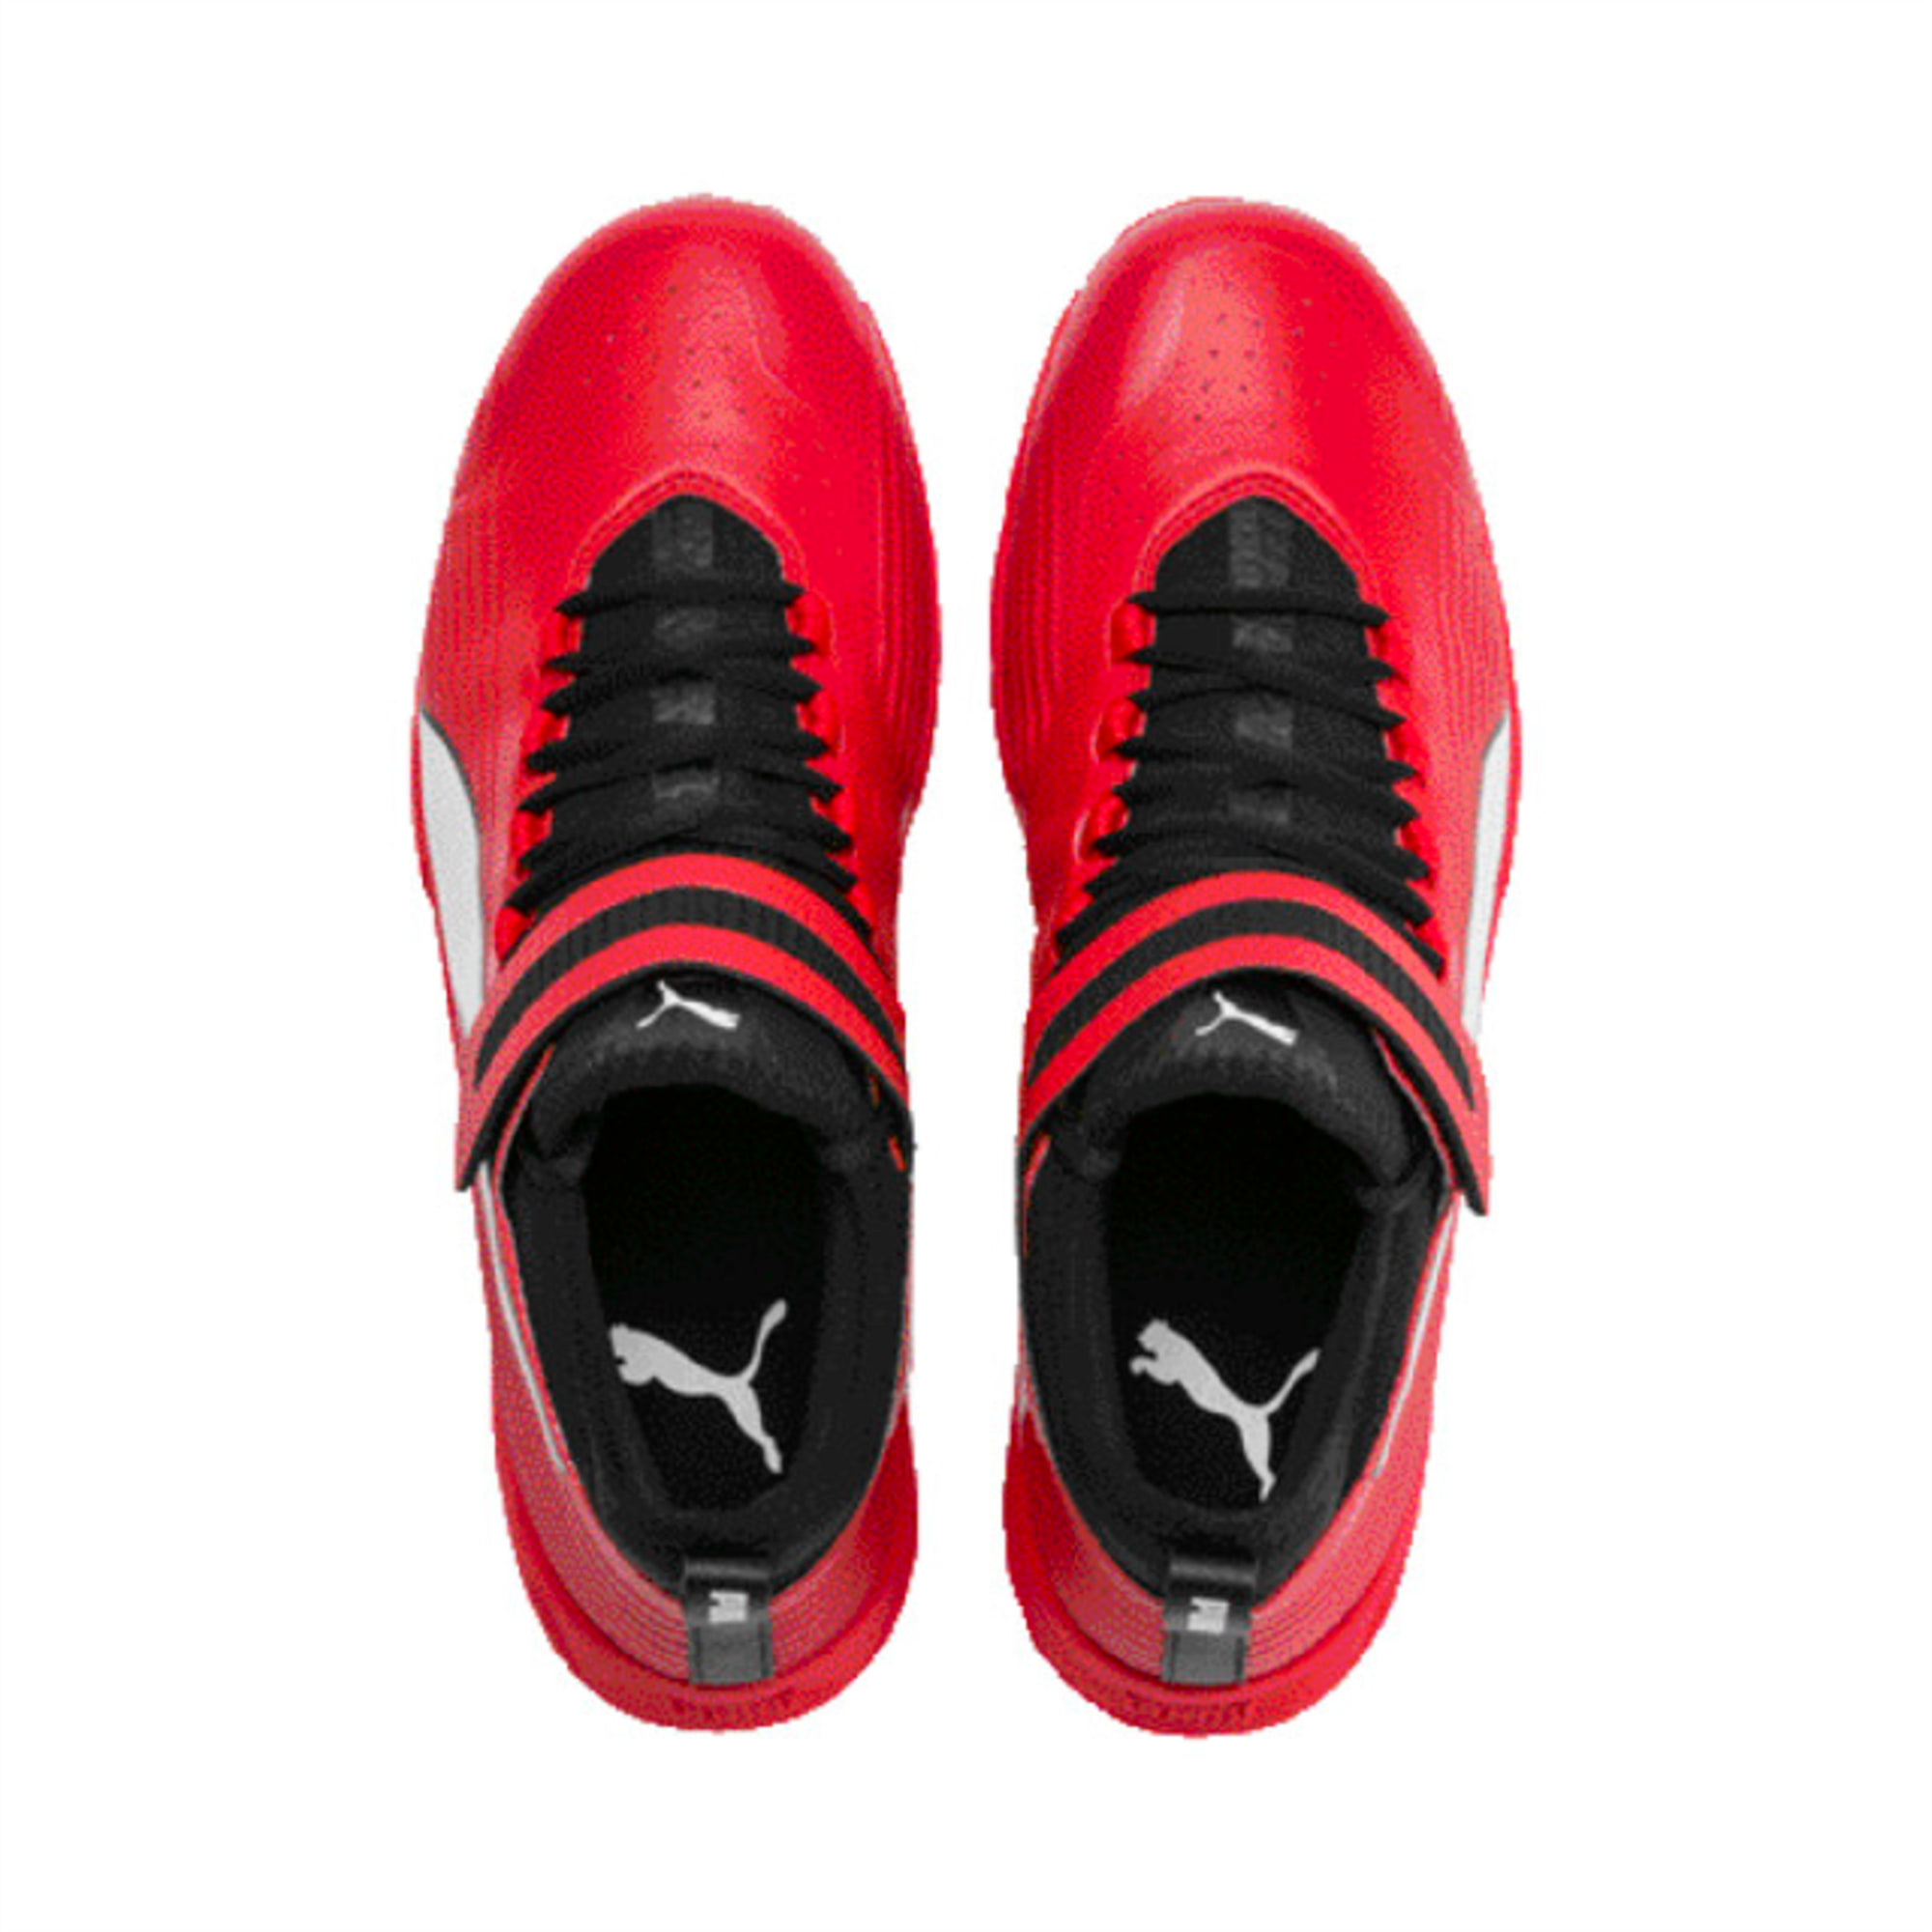 red puma cricket shoes